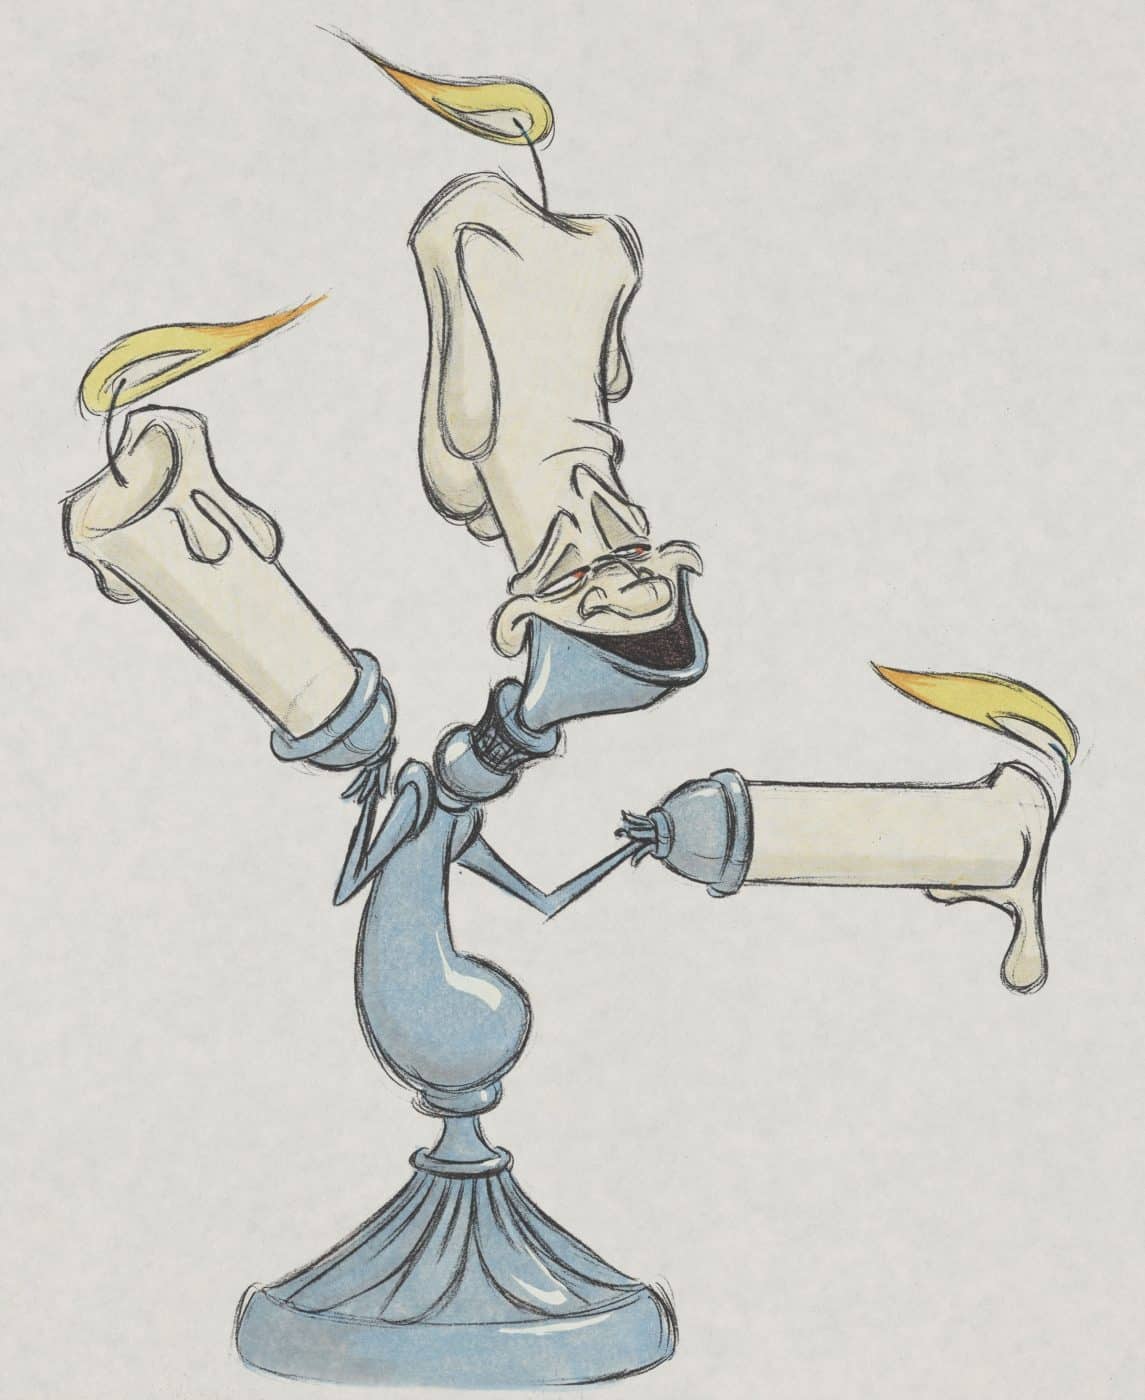 Sketch of Lumière from Disney's Beauty and the Beast